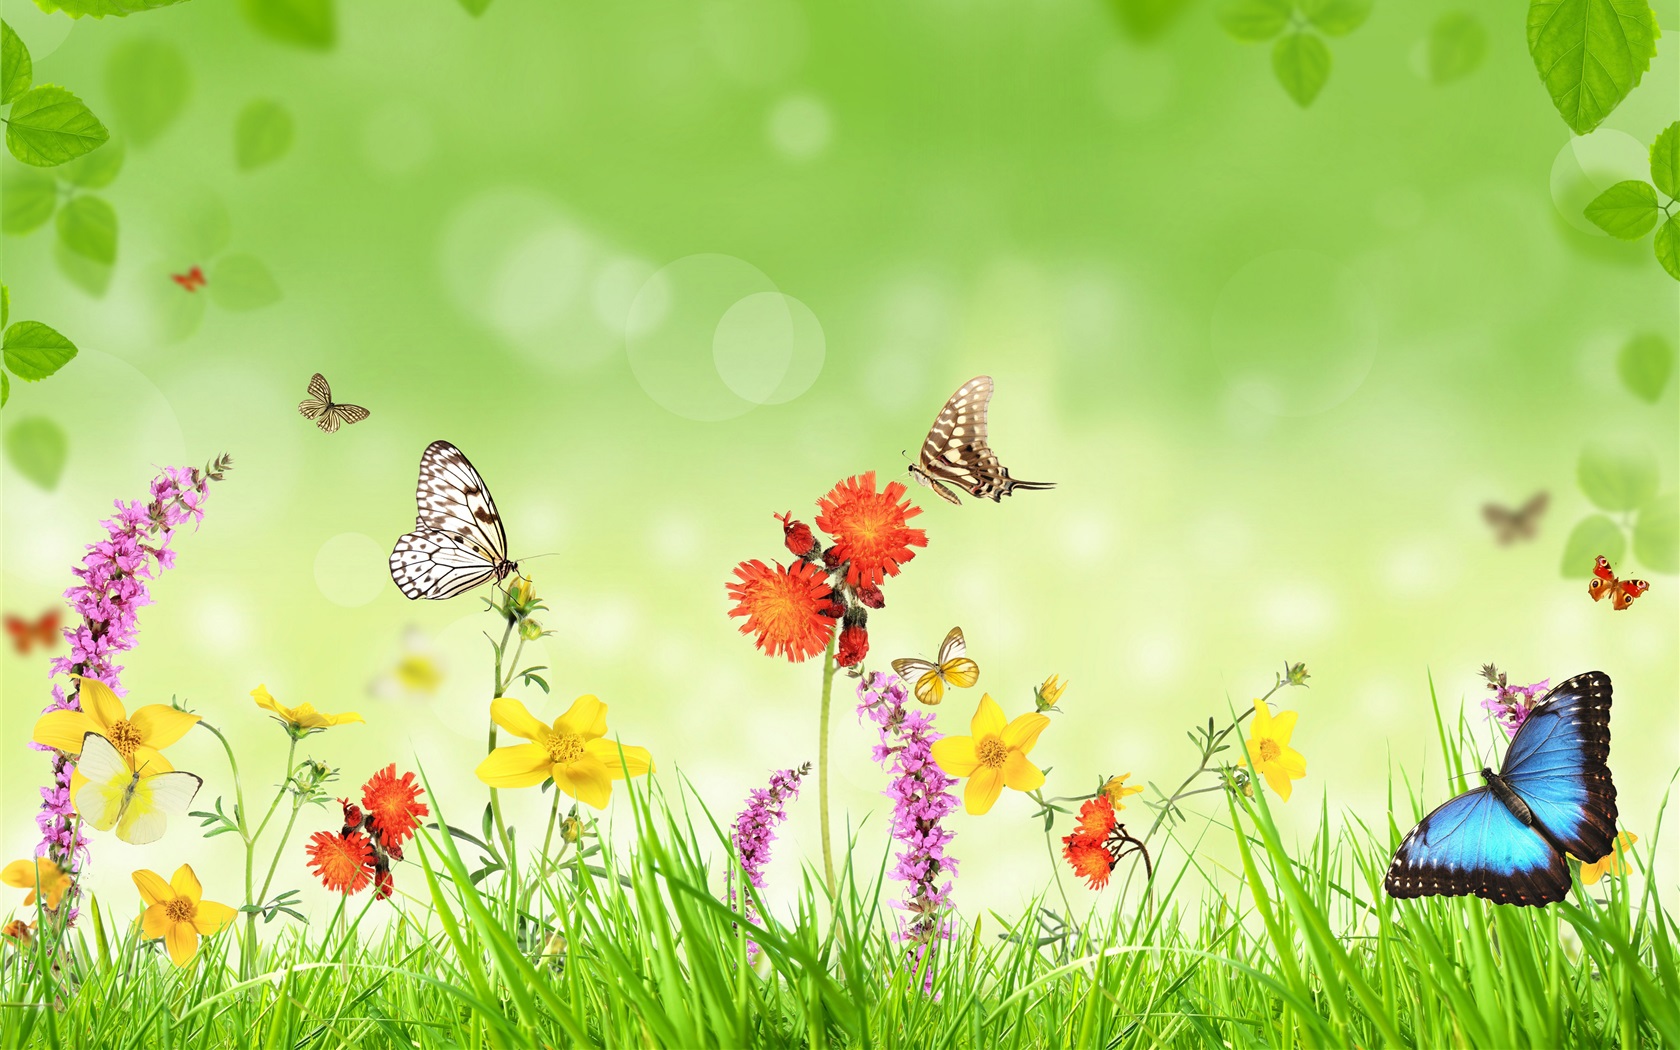 Wallpaper Spring, flowers, grass, butterfly, green background, creative design 3840x2160 UHD 4K Picture, Image